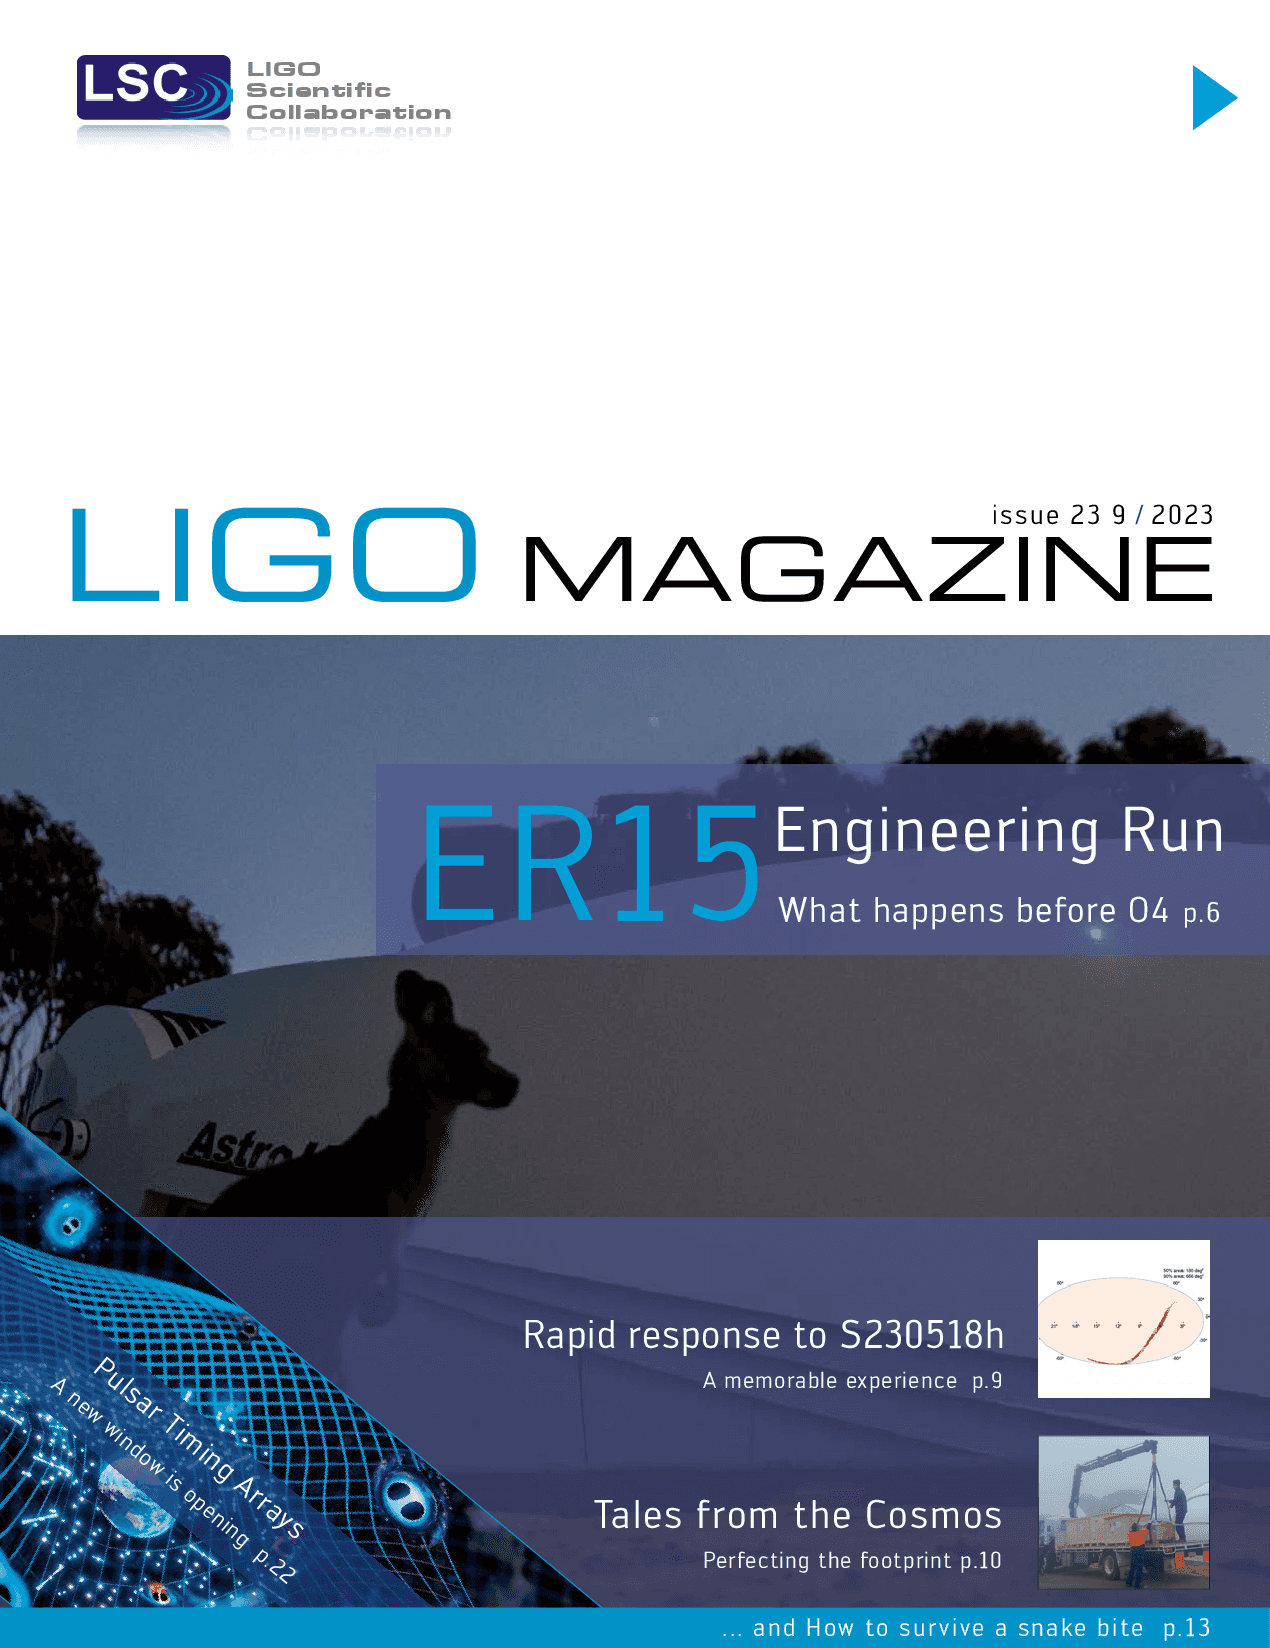 News-Image 2 of: New LIGO Magazine Issue 23 is out